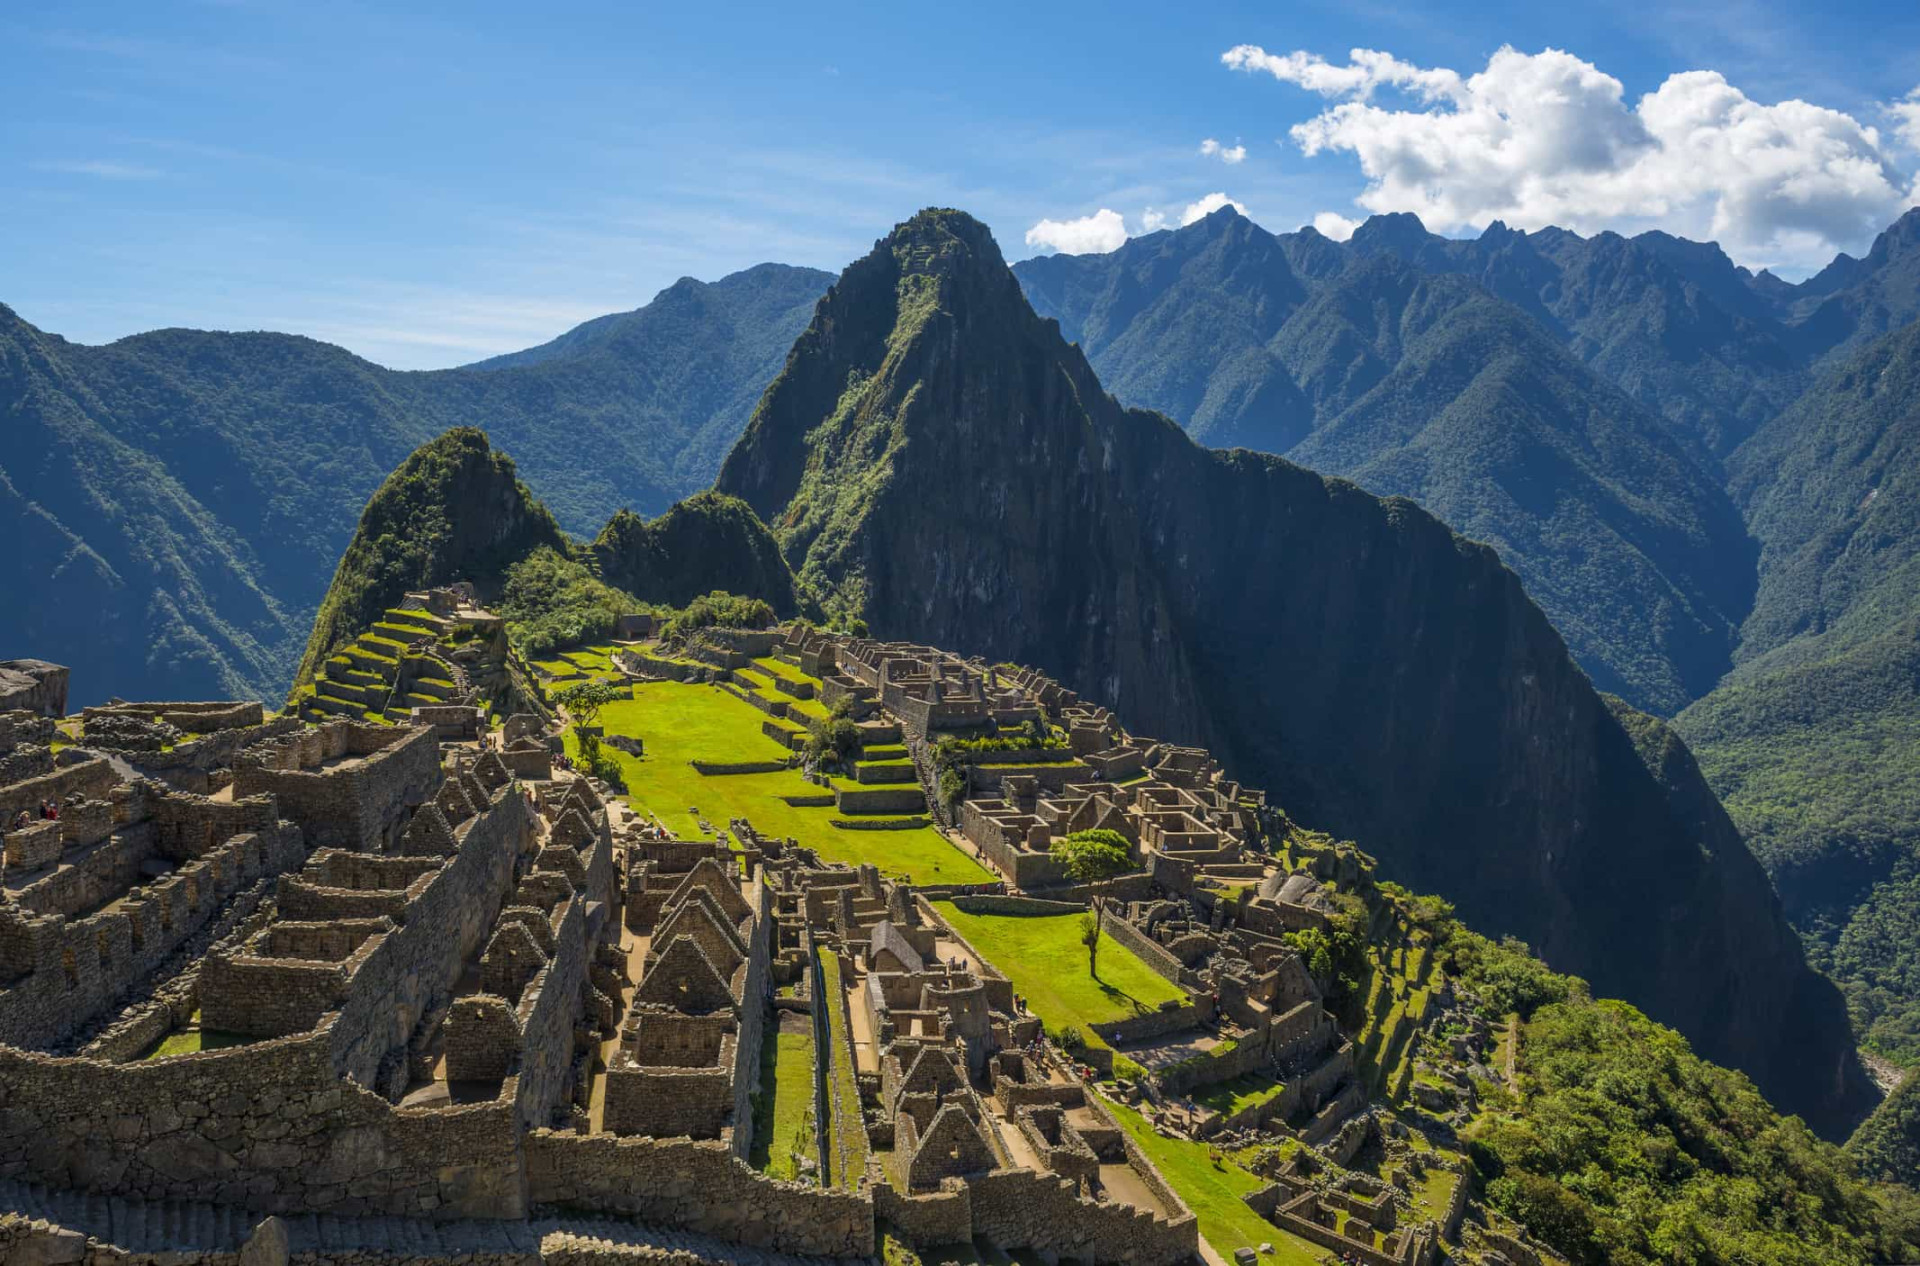 Location: Cuzco<br>Criteria: Mixed<br>Year established: 1983<br>Description: One of the world's most recognized historic landmarks, this expansive mountain estate, established around the middle of the 15th century, is also the most familiar icon of the Inca civilization.<p><a href="https://www.msn.com/en-us/community/channel/vid-7xx8mnucu55yw63we9va2gwr7uihbxwc68fxqp25x6tg4ftibpra?cvid=94631541bc0f4f89bfd59158d696ad7e">Follow us and access great exclusive content every day</a></p>